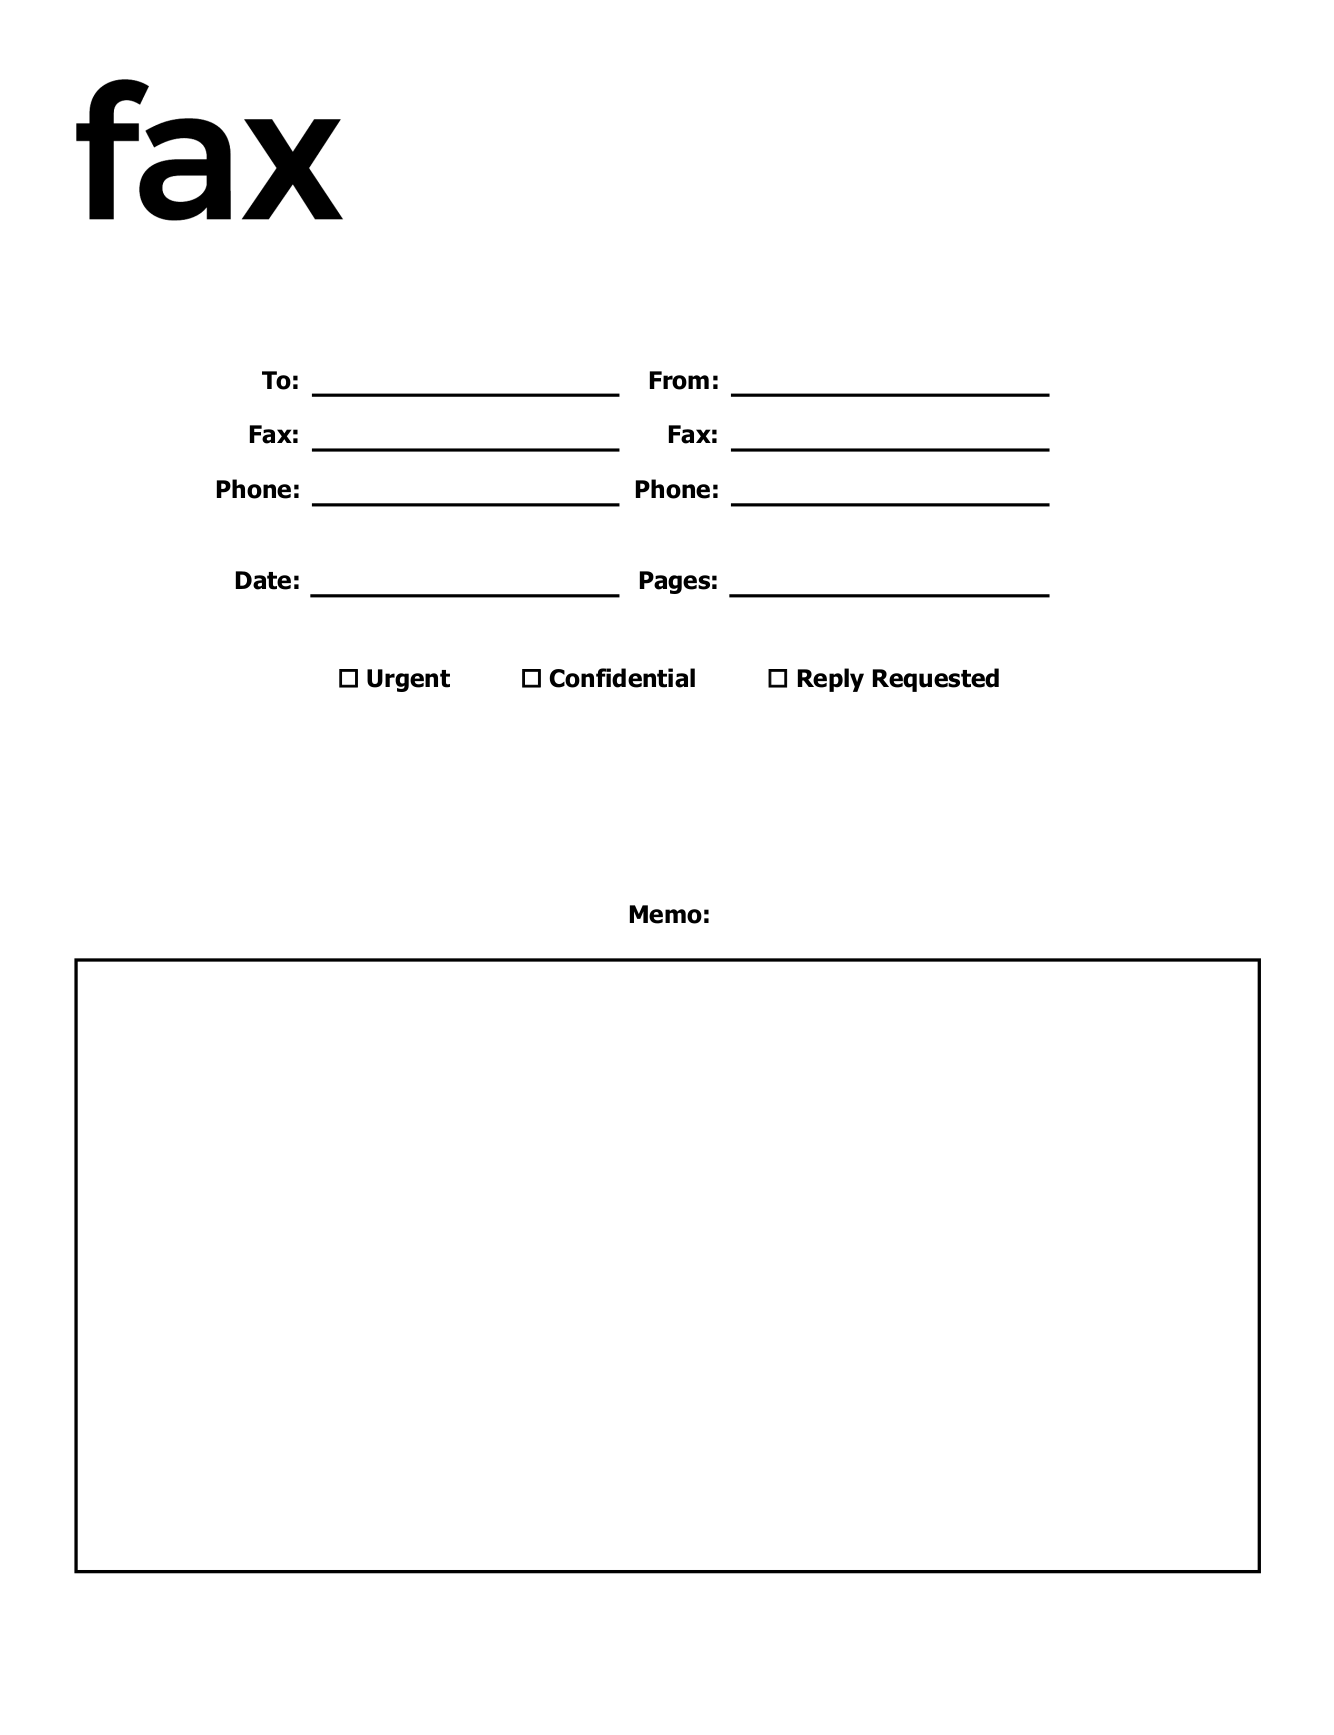 Basic Fax Cover Sheet Free Printable